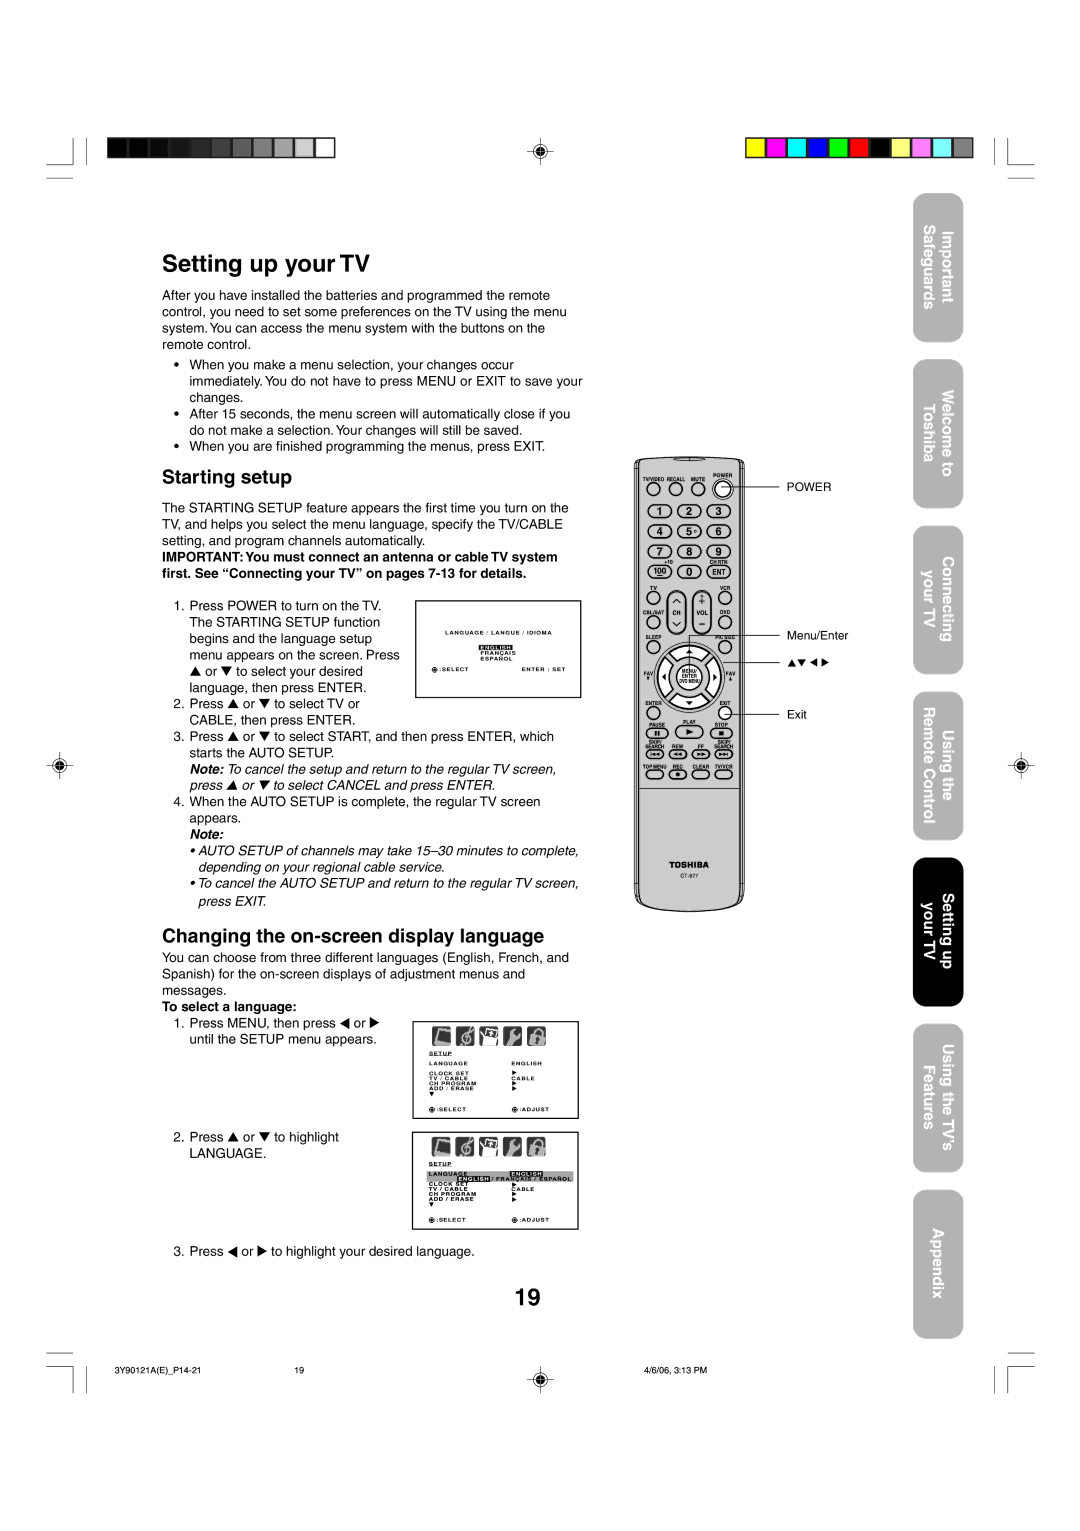 Toshiba 26DF56 appendix Setting up your TV, Starting setup, Changing the on-screen display language 